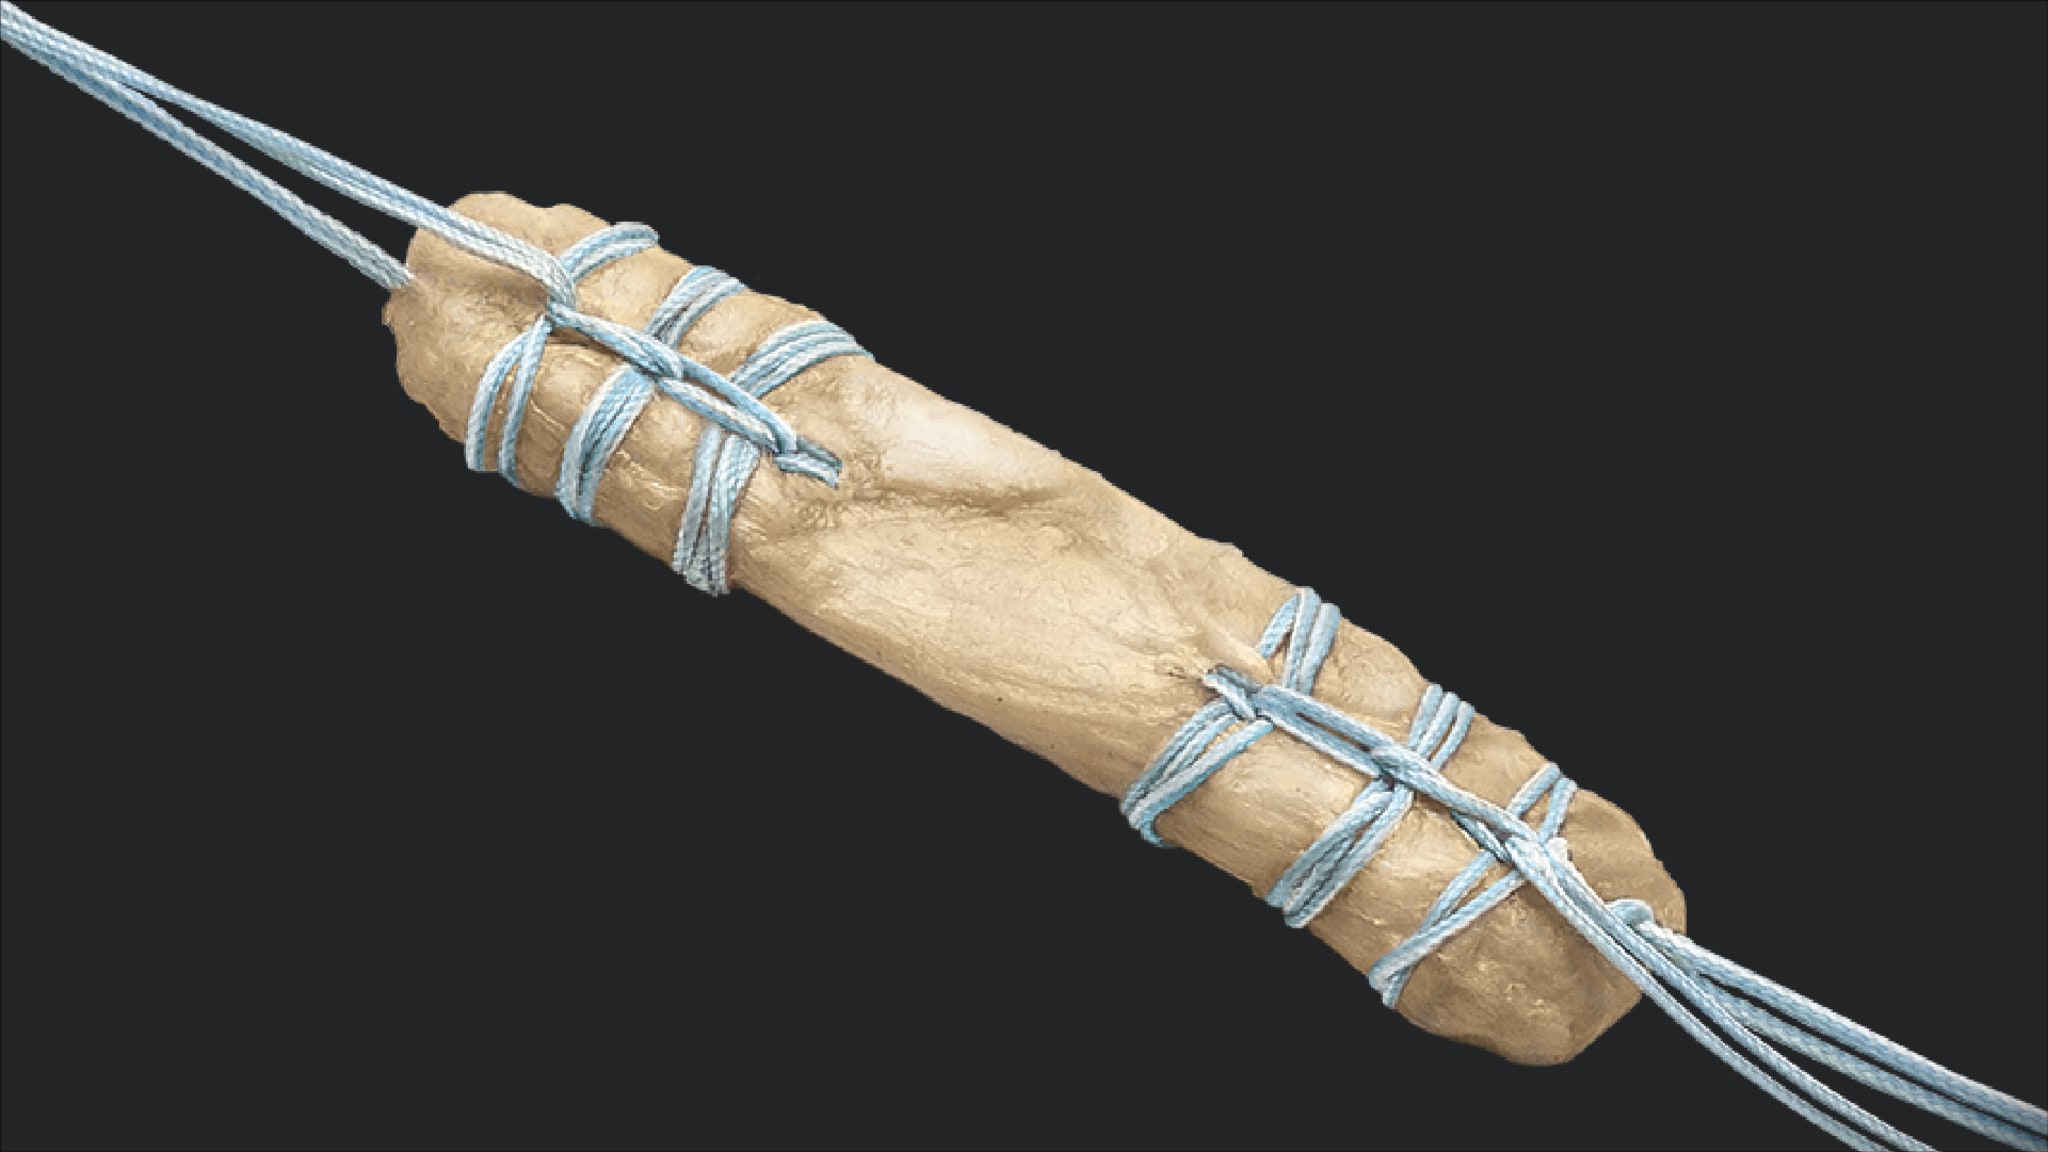 ACL Reconstruction Using QuadLink™ Presutured Allograft and TightRope® II Implants